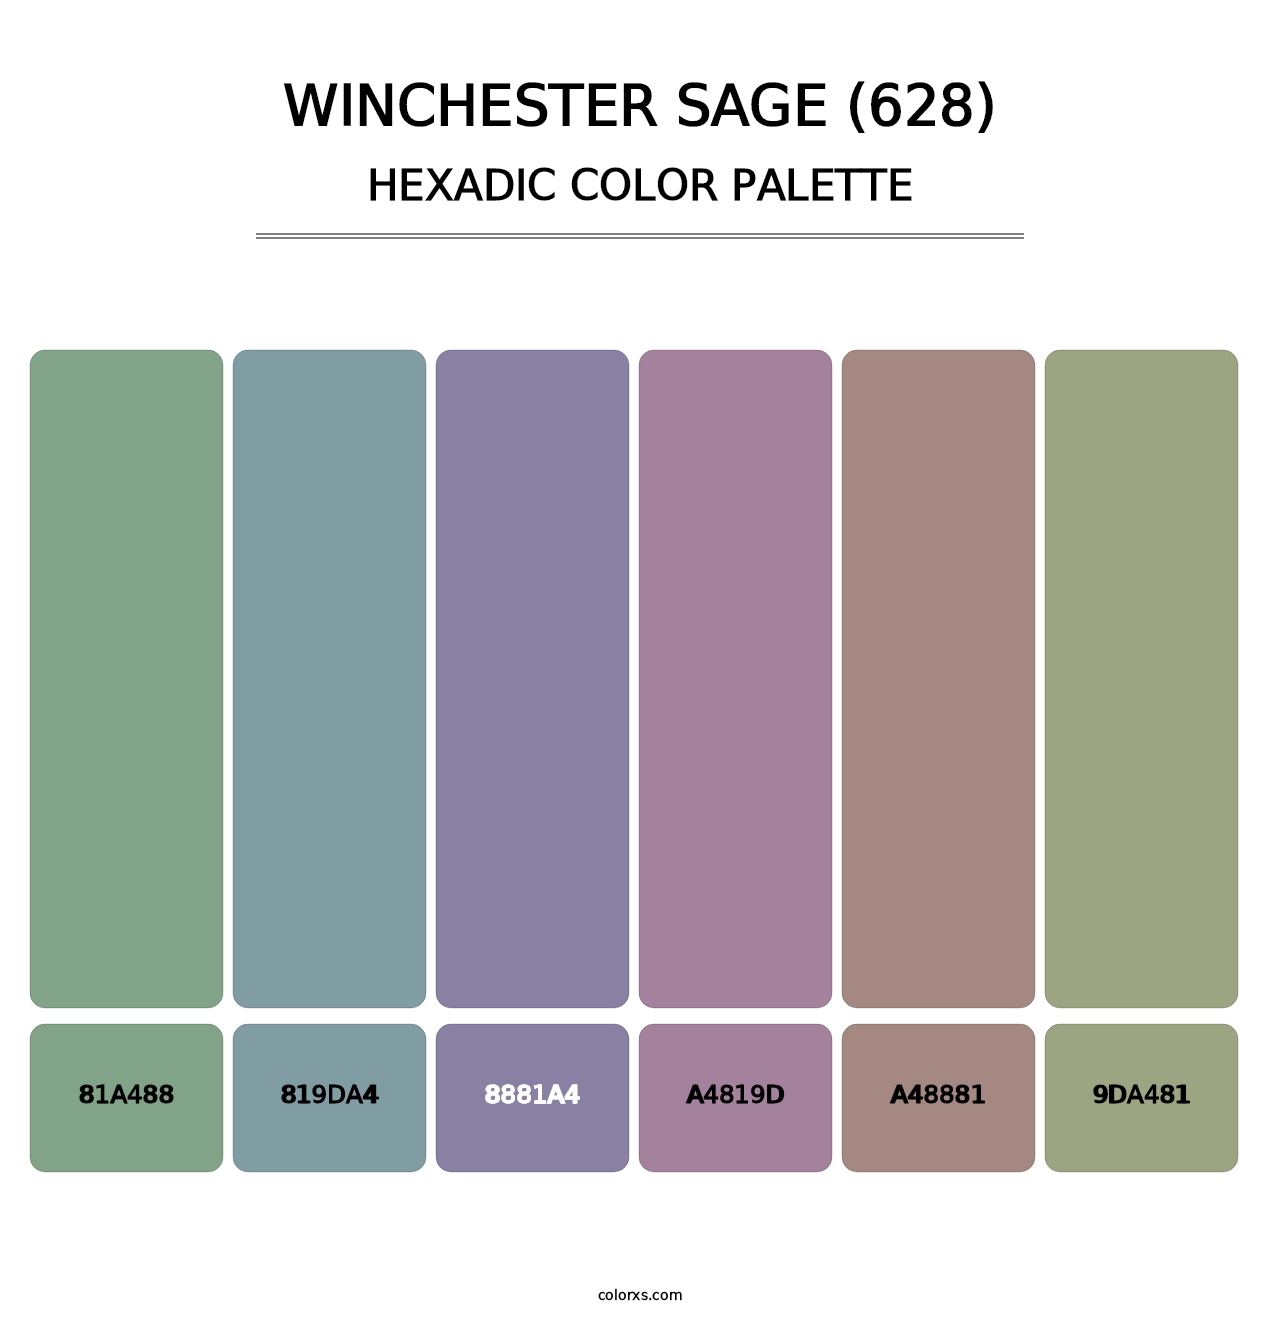 Winchester Sage (628) - Hexadic Color Palette